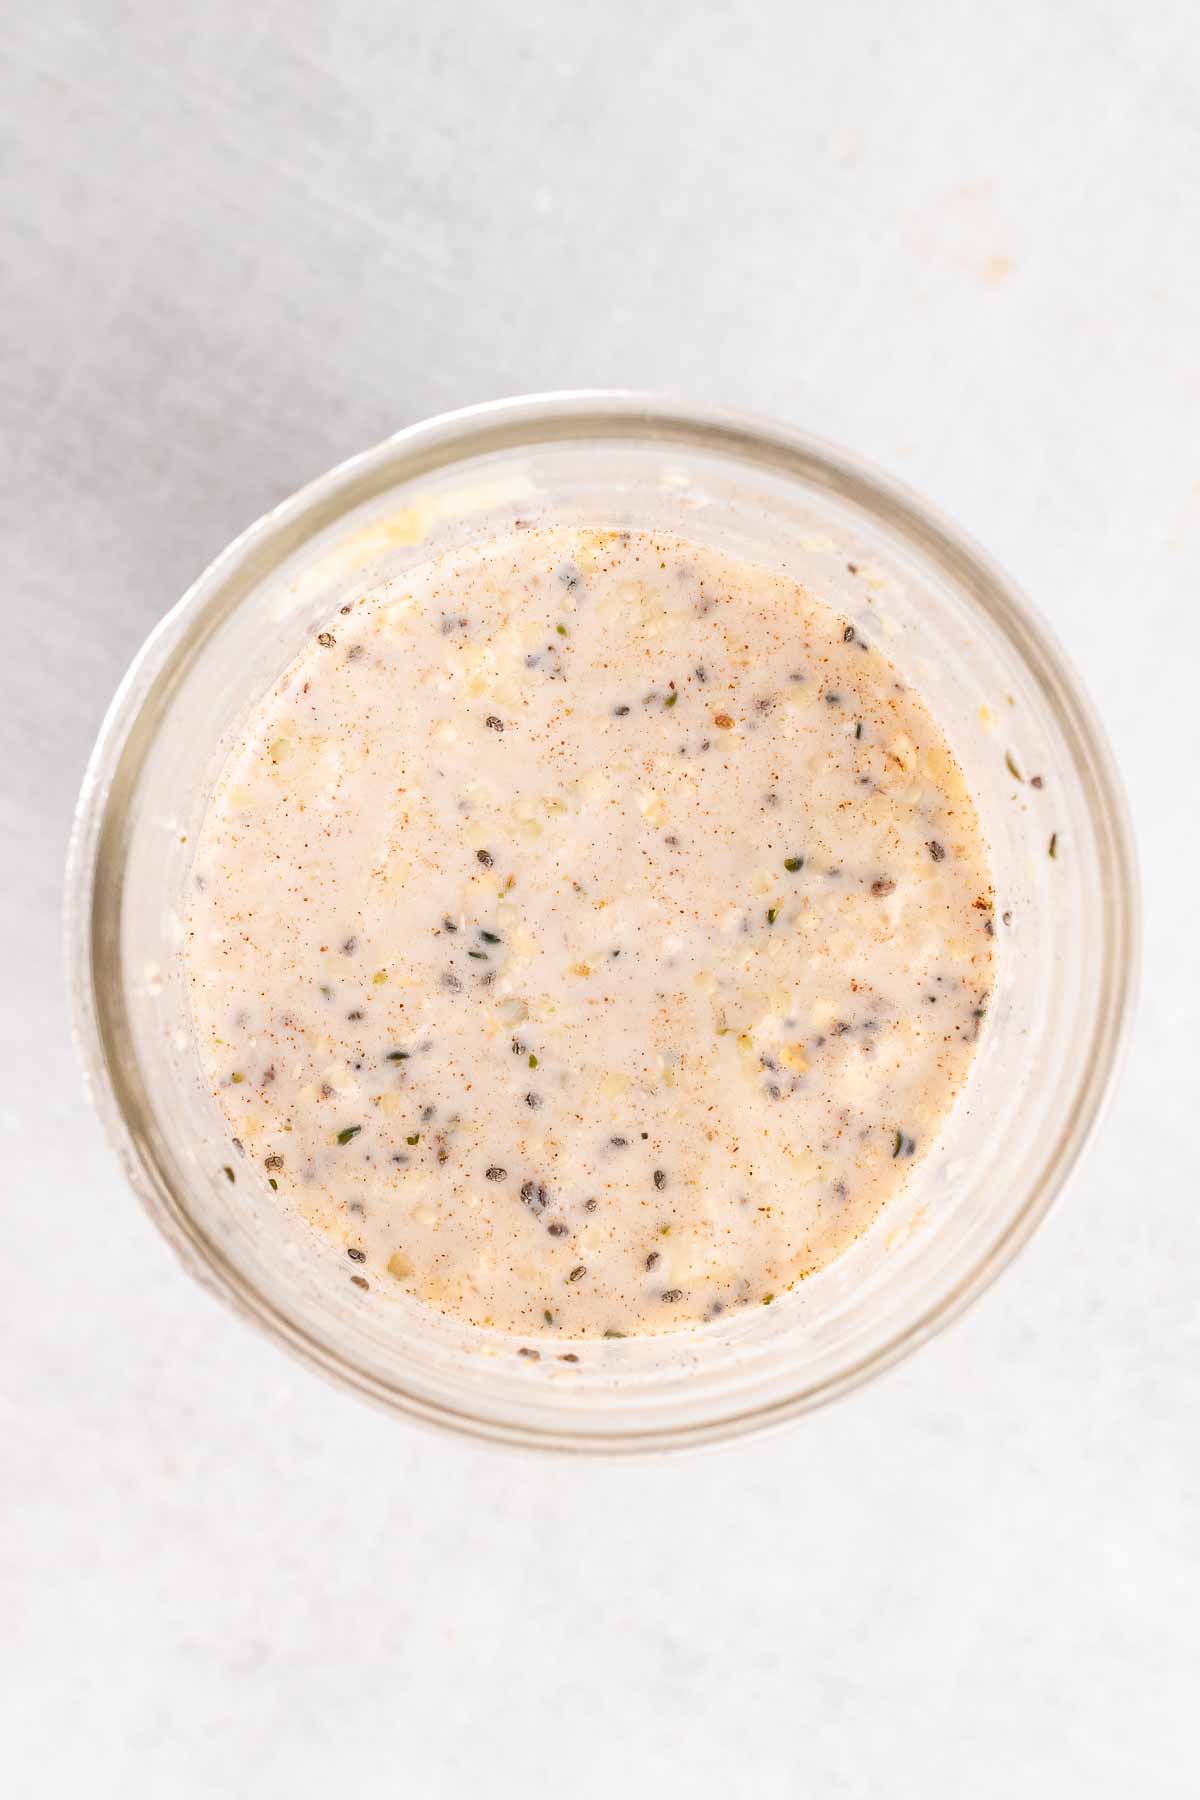 Ingredients for overnight oats mixed together in a glass jar, as seen from above